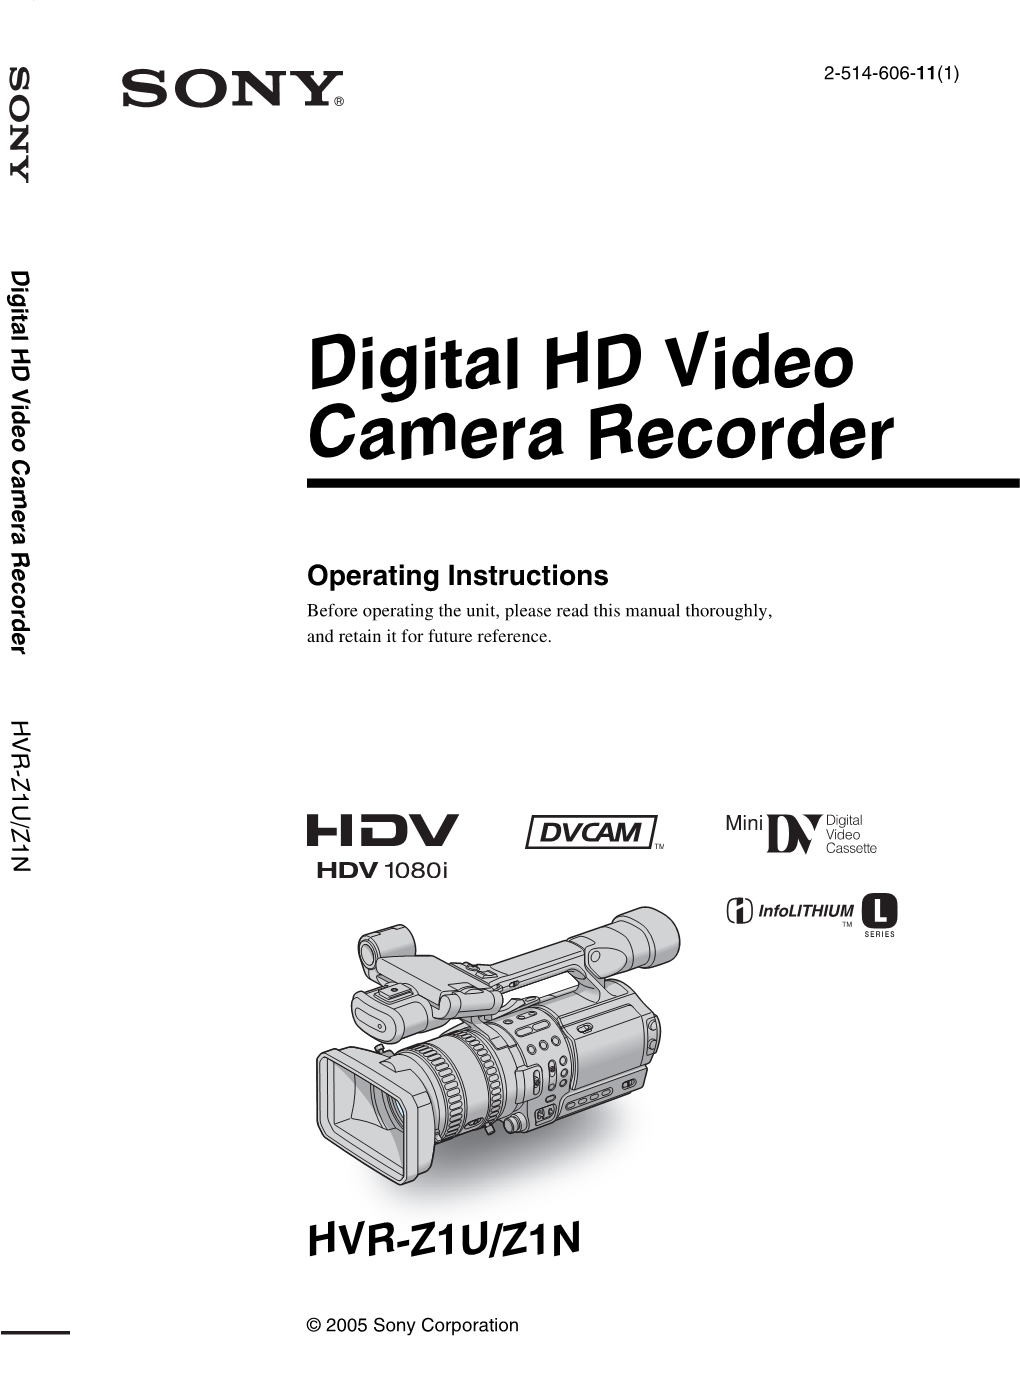 Digital HD Video Camera Recorder HVR-Z1U/Z1N Read This First for Customers in the U.S.A